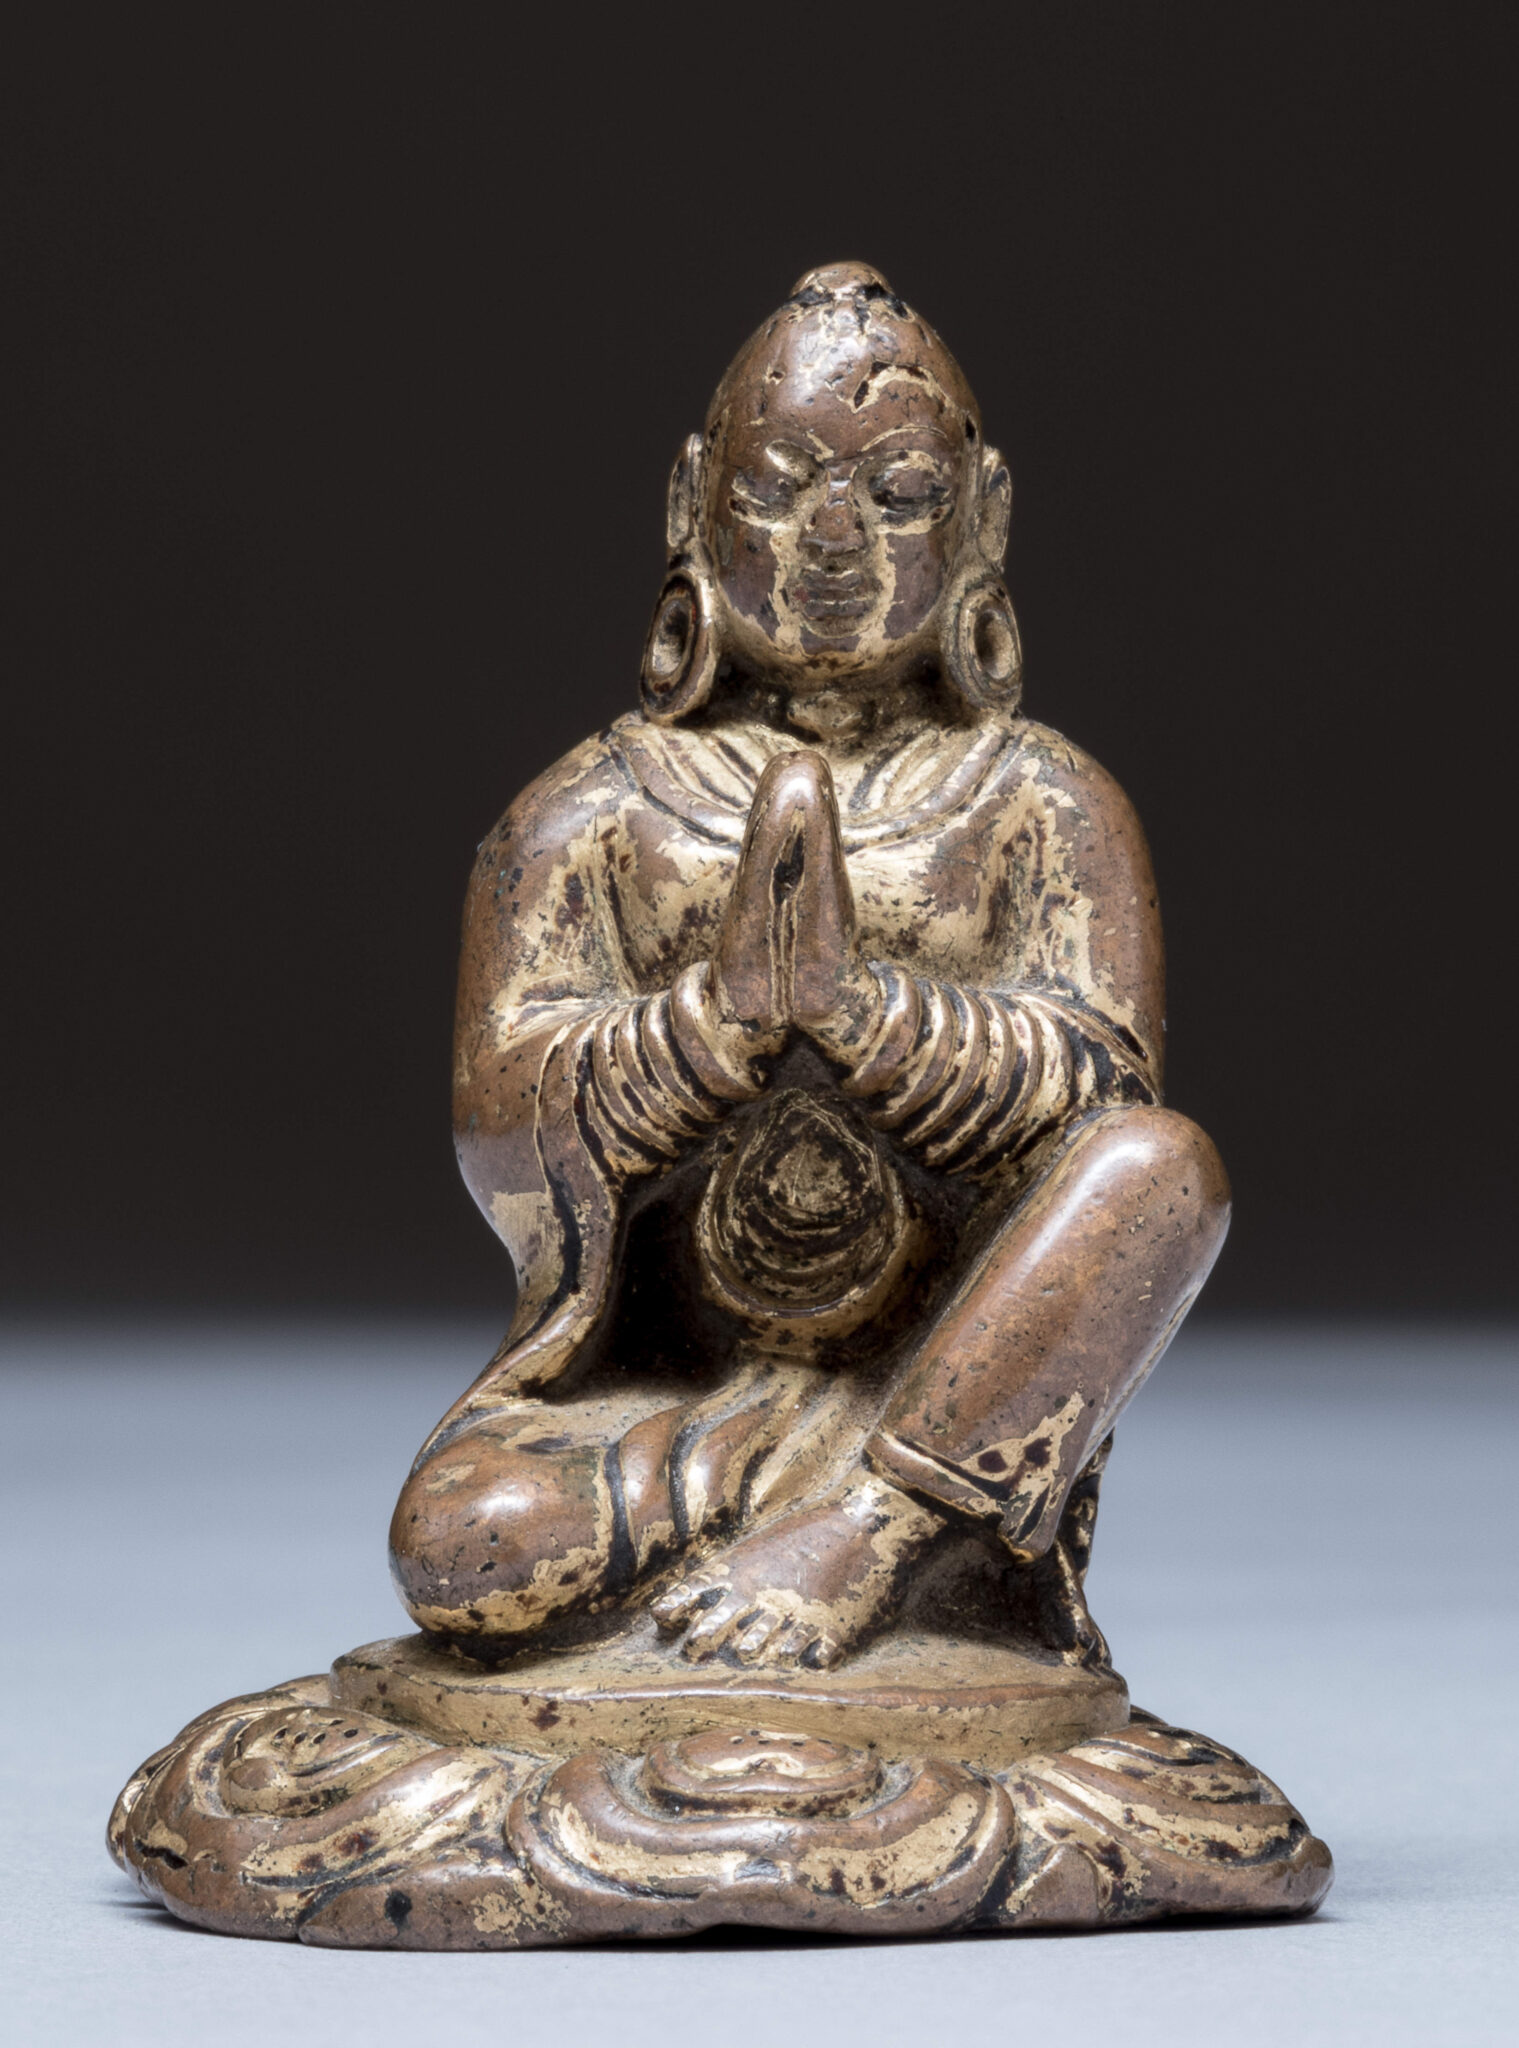 Tarnished statuette depicting figure seated with hands clasped at chest and right knee raised